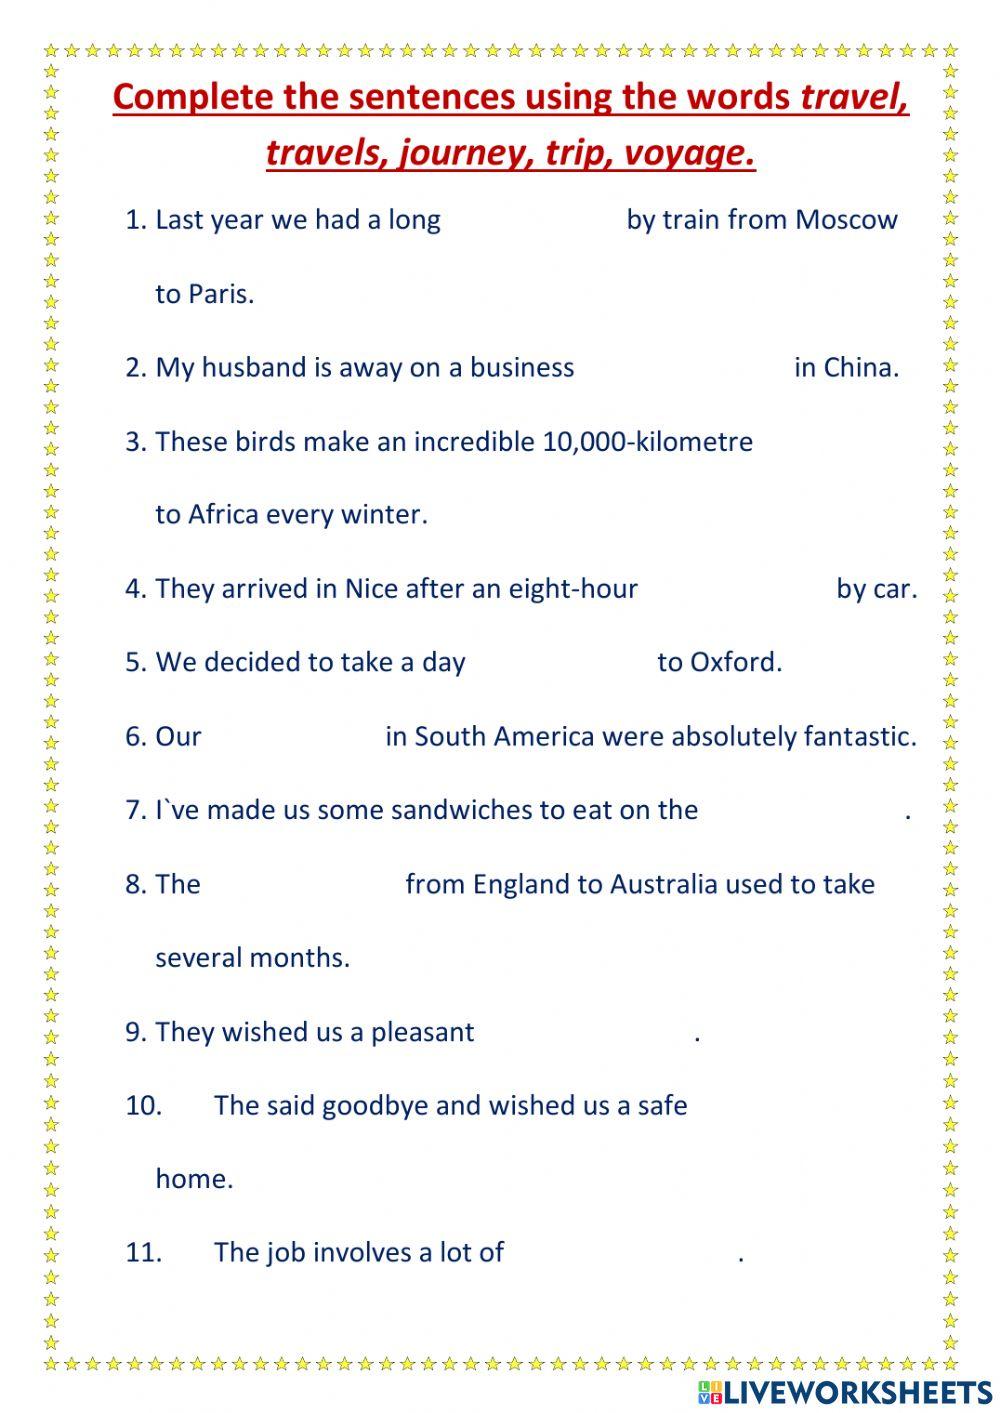 Using of travel, journey, trip, voyage online exercise for | Live Worksheets